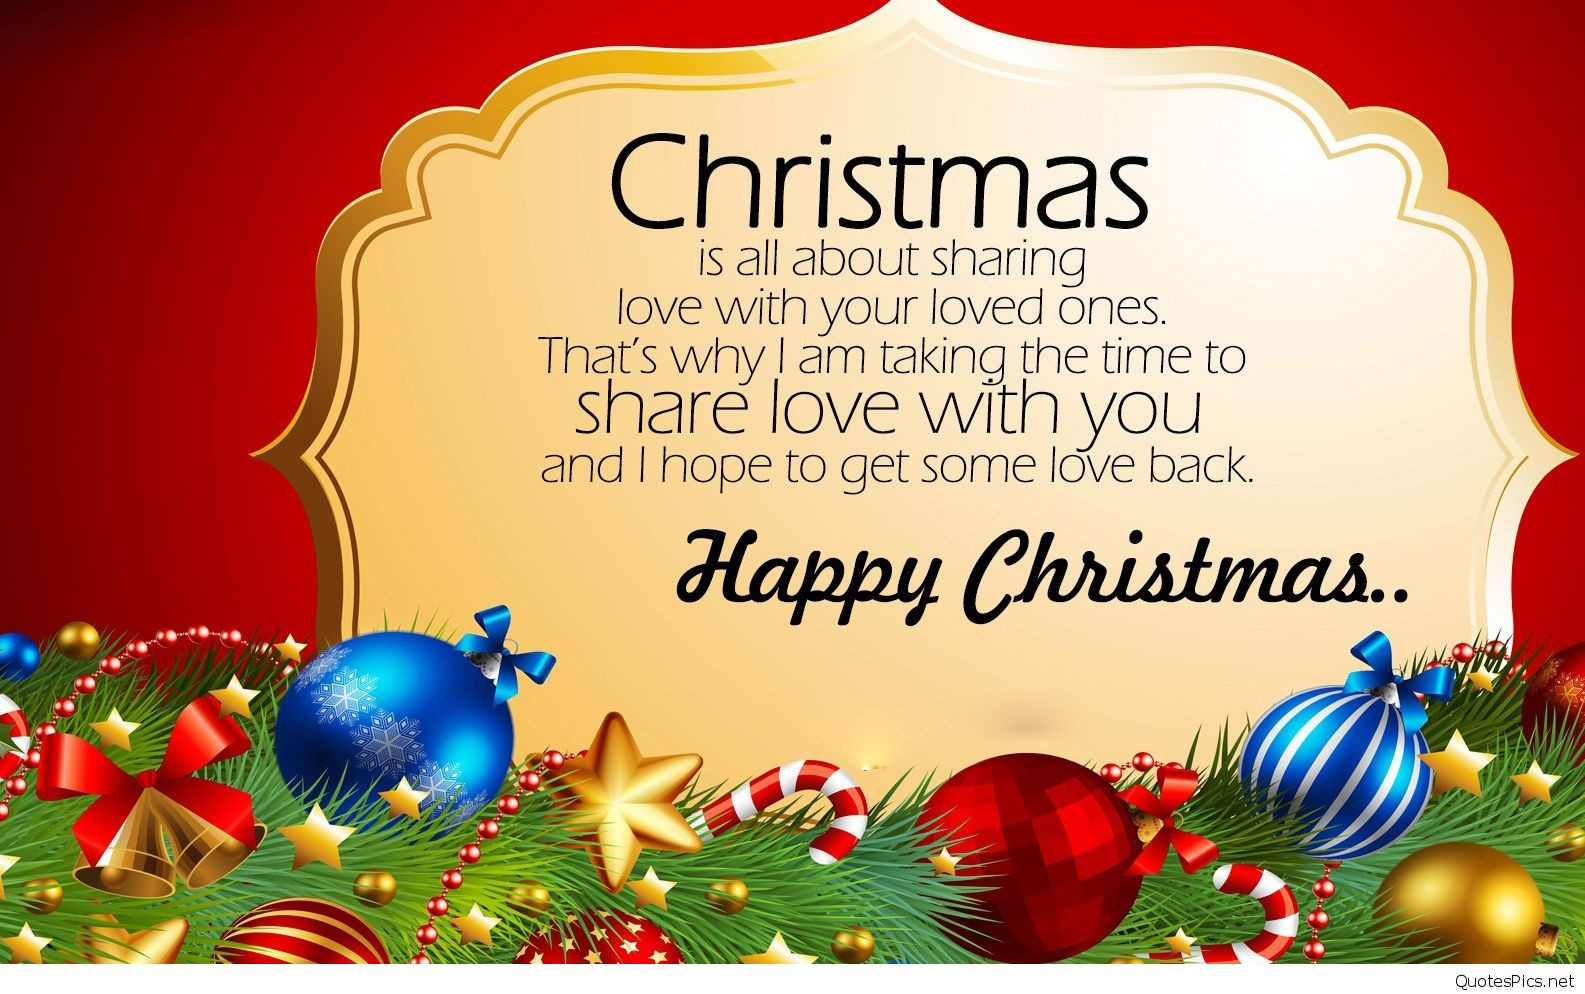 The Best Happy Christmas Quotes - Home Inspiration and Ideas | DIY ...